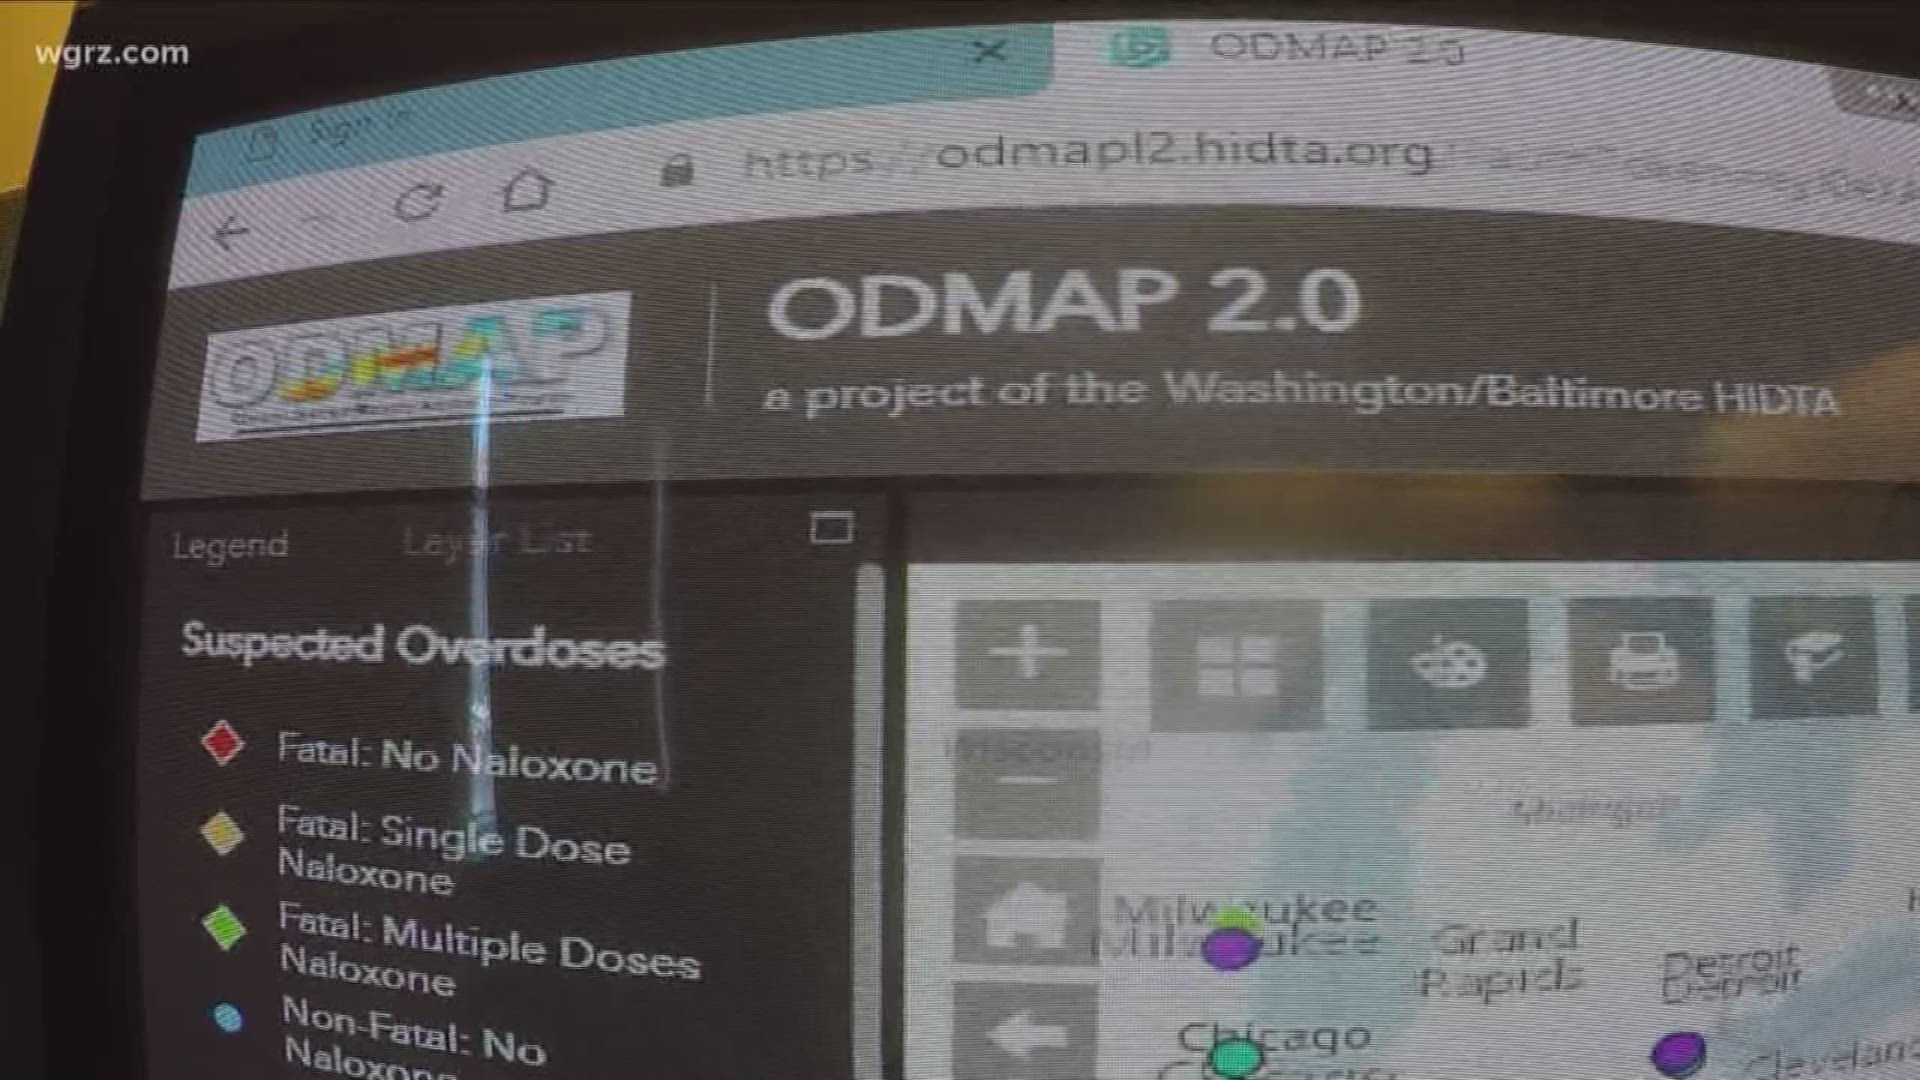 OD Map- it allows police nationwide to log information about drug overdoses police respond to.